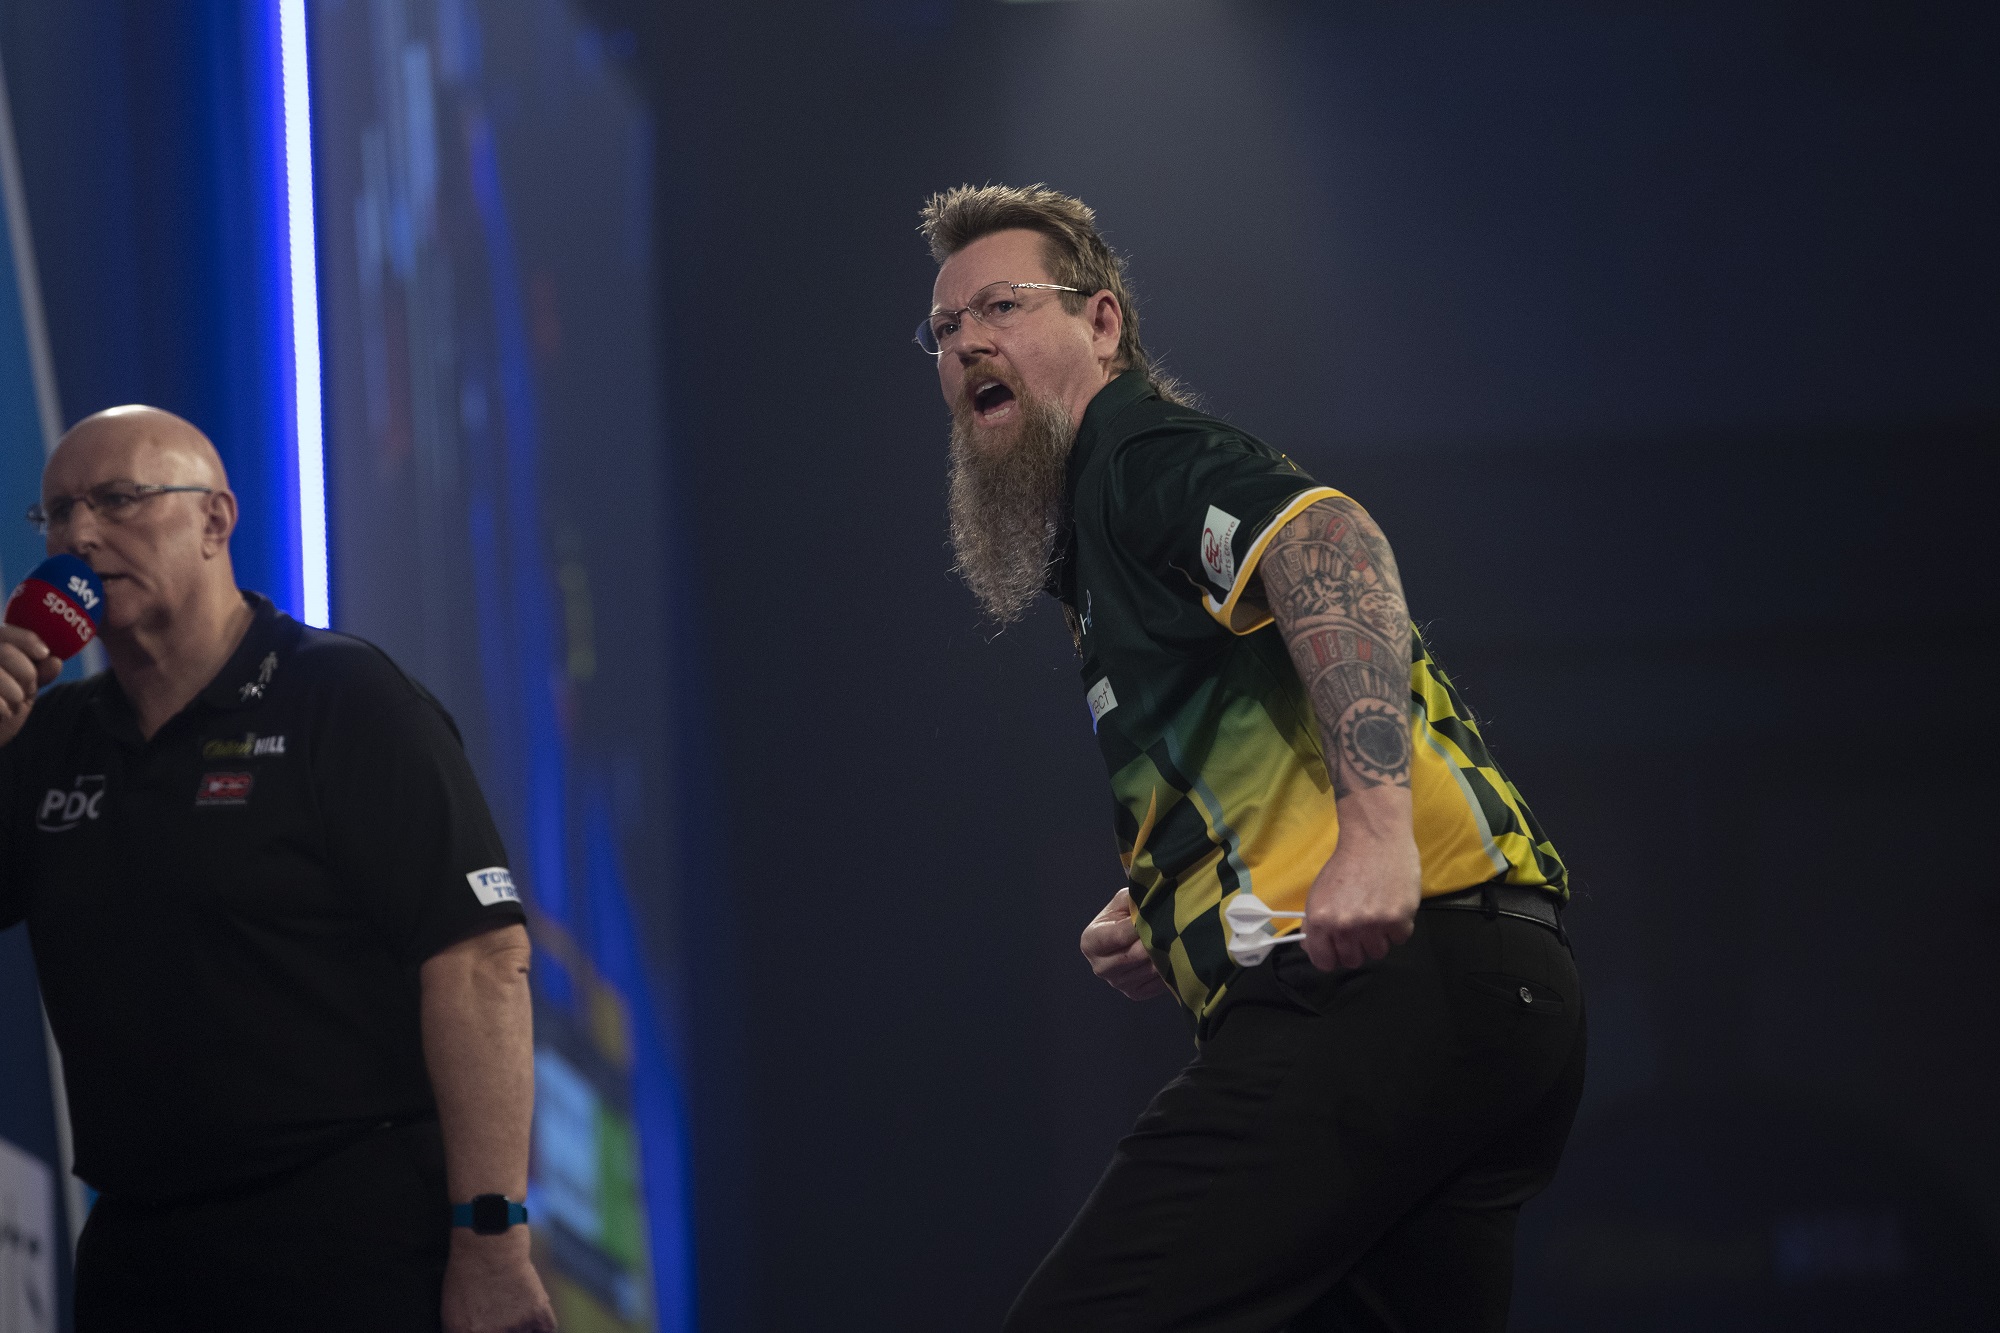 Simon Whitlock after World Darts Championship win: “There’s no better than me right now”